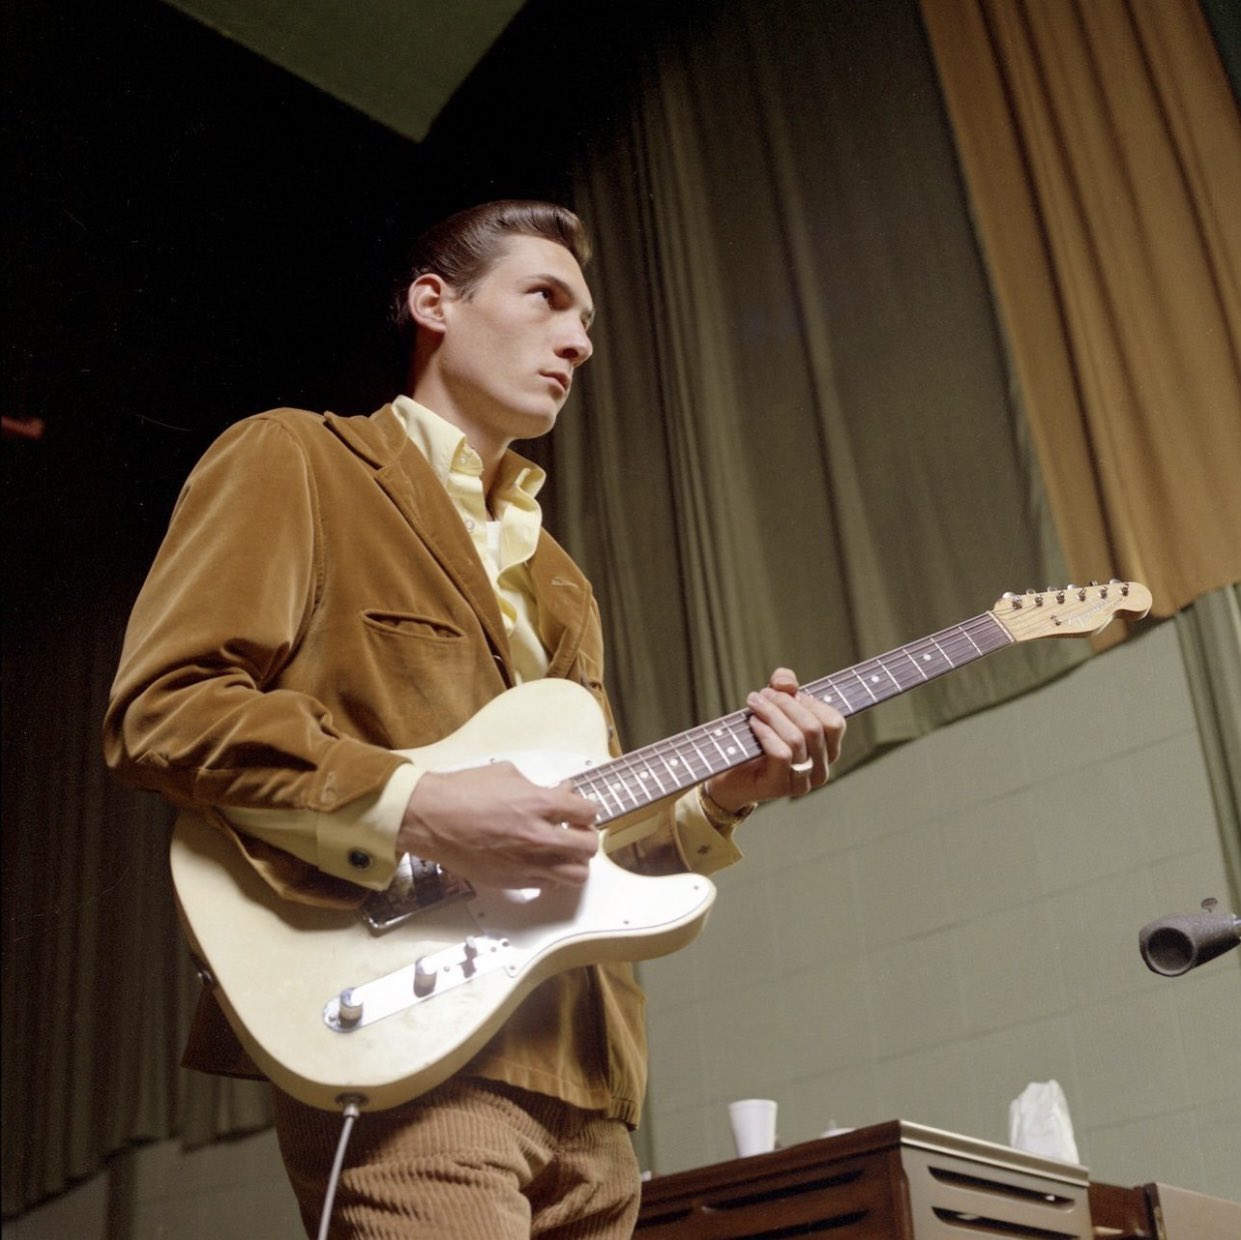 Happy birthday to one of my favorite Telecaster players, Steve Cropper! 